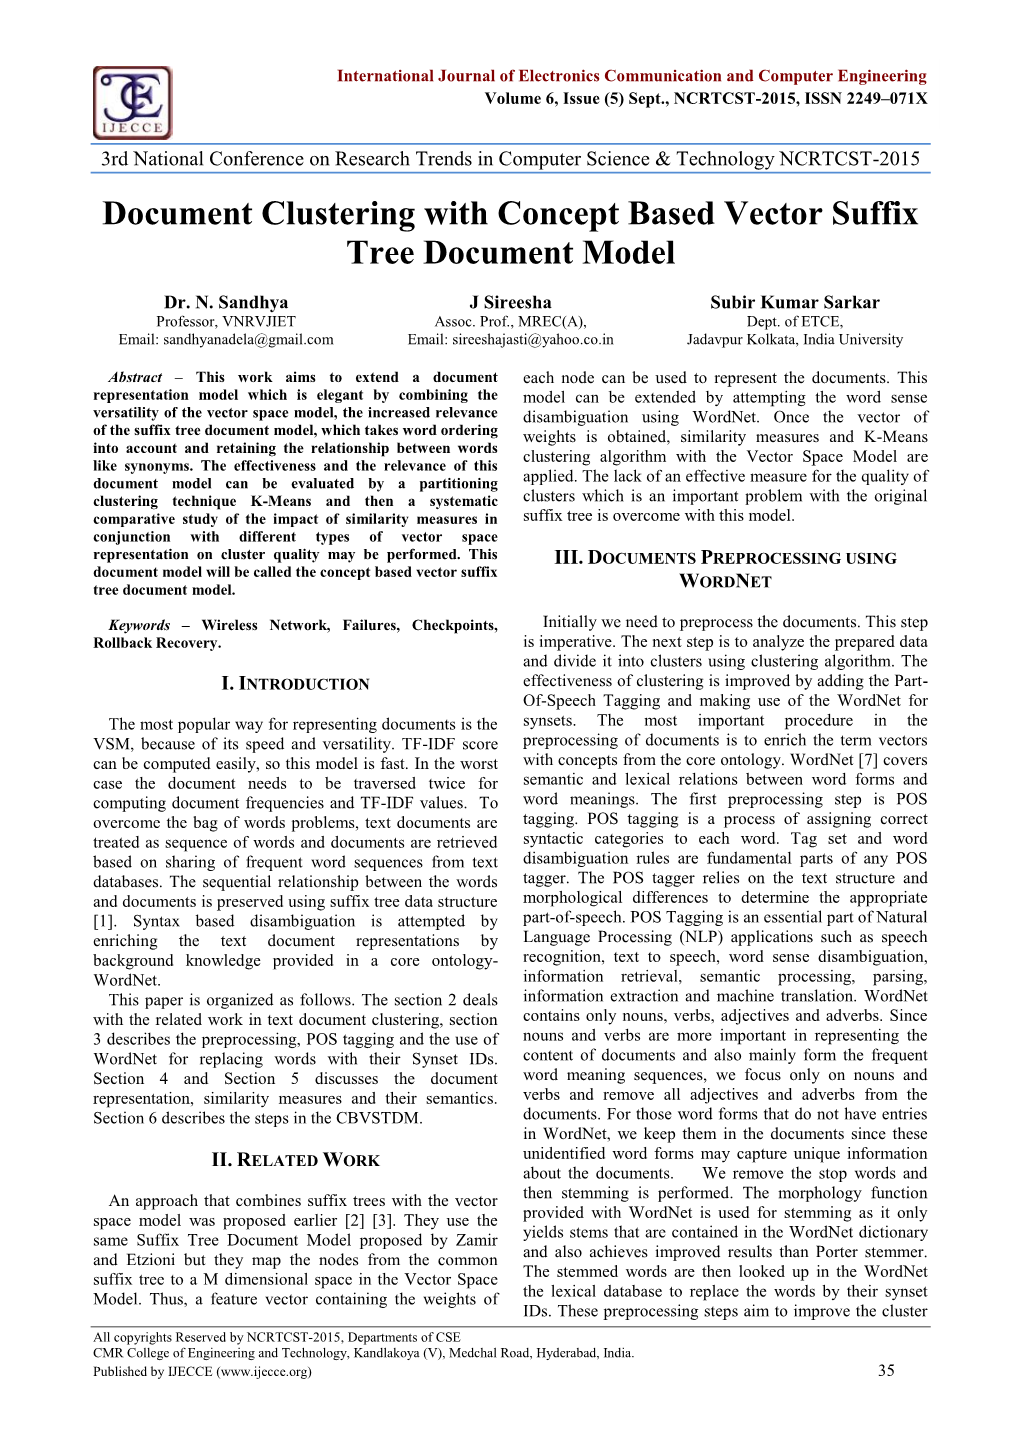 Document Clustering with Concept Based Vector Suffix Tree Document Model